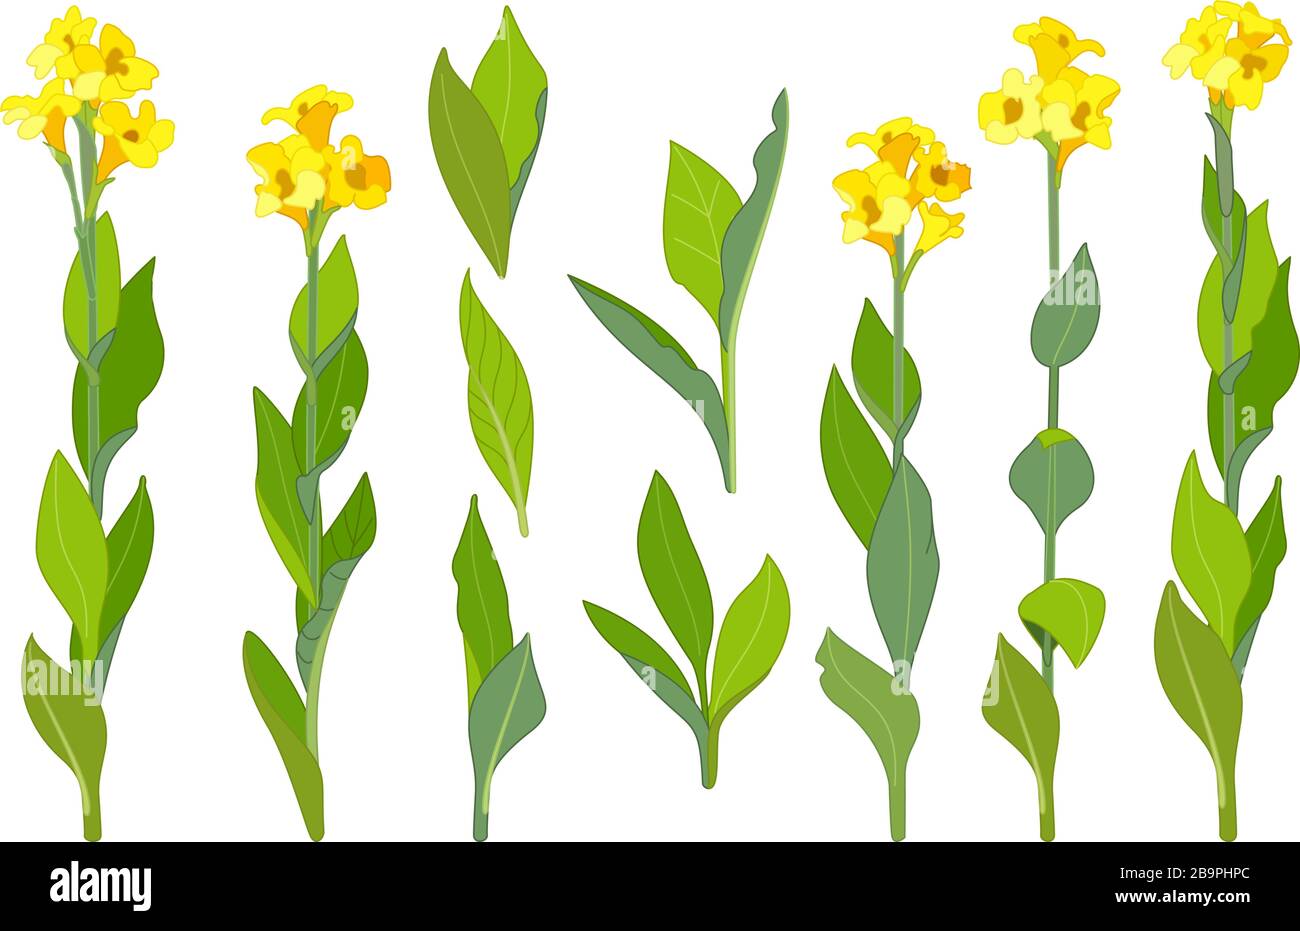 vector handdrawn plant clipart Canna lily flowers set Stock Vector